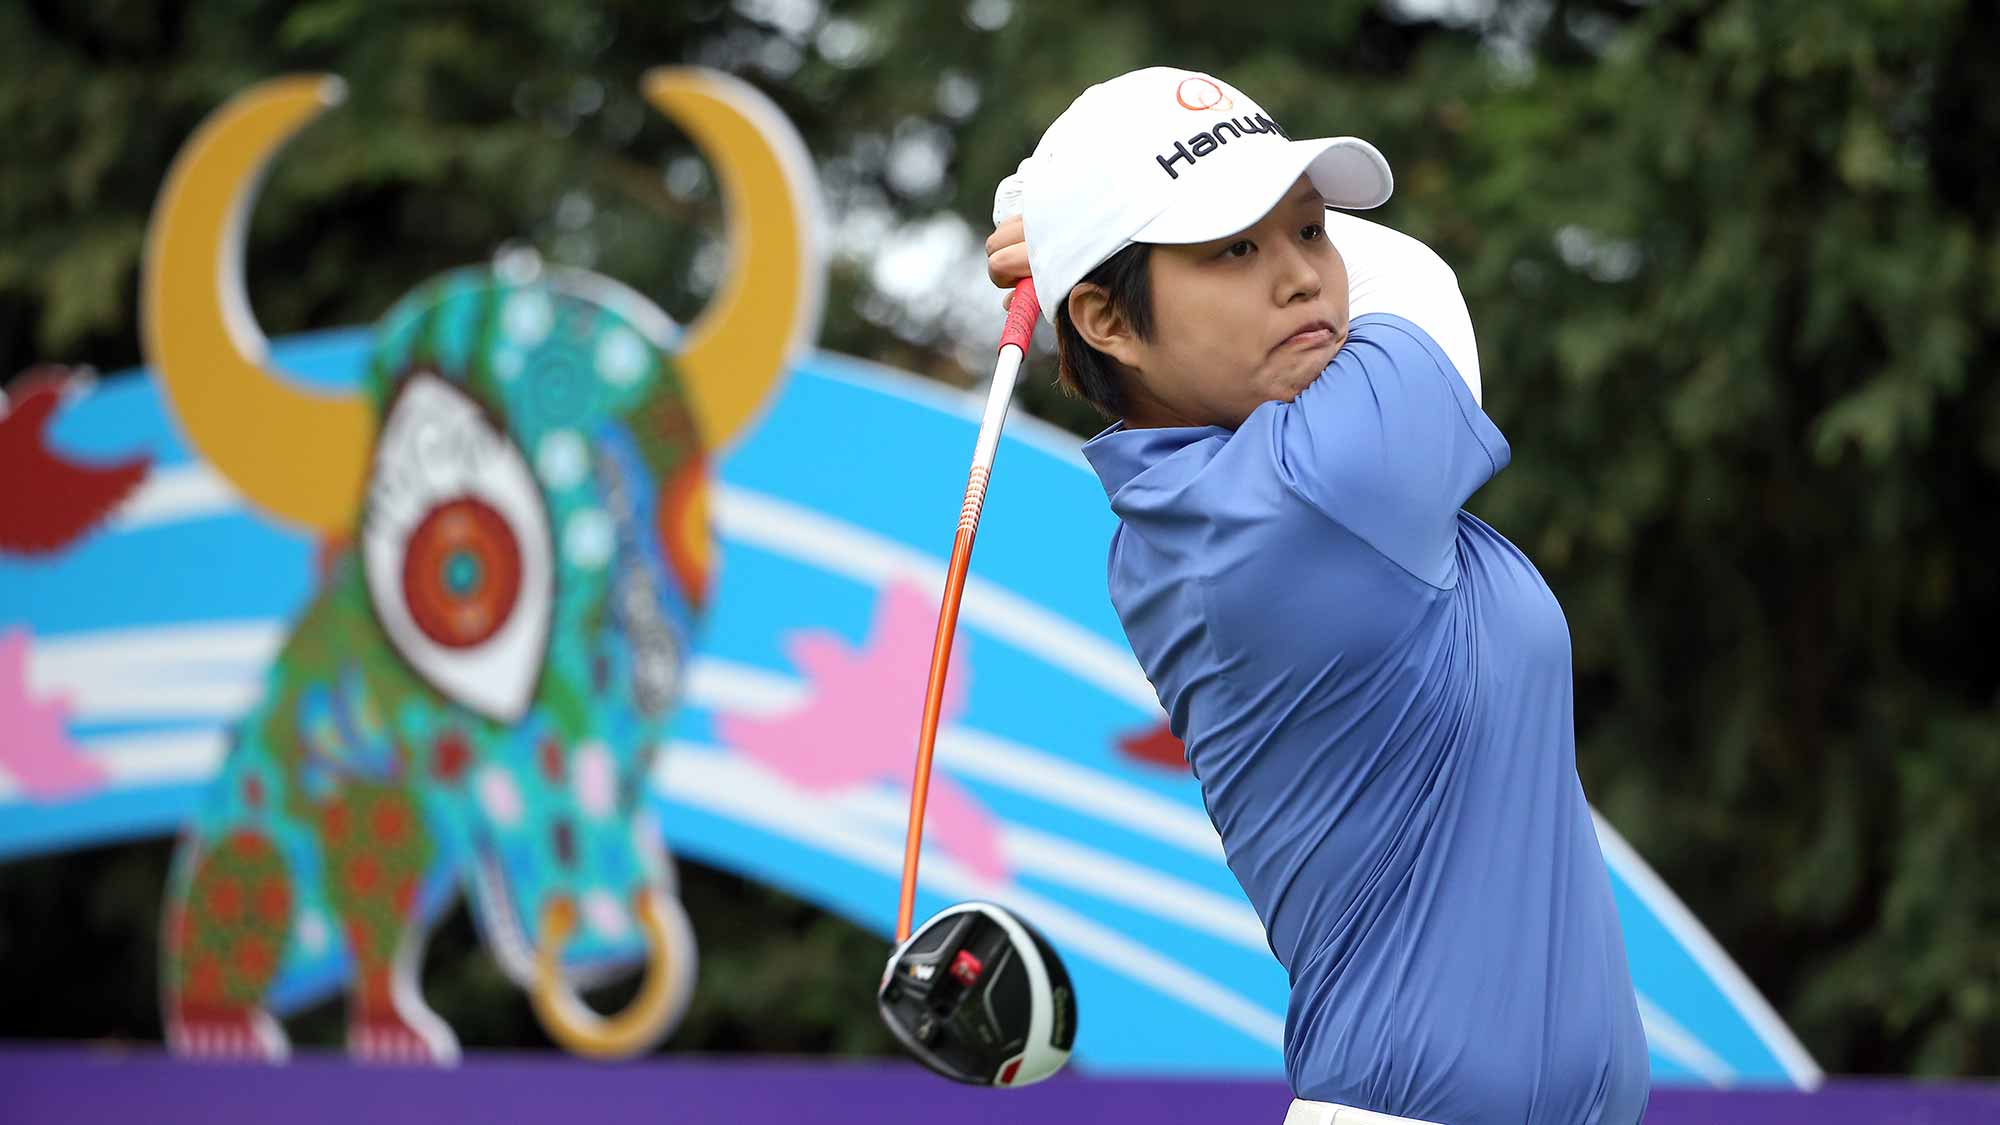 Haru Nomura of Japan tees off on the 13th hole during round one of the Swinging Skirts LPGA Classic at Lake Merced Golf Club